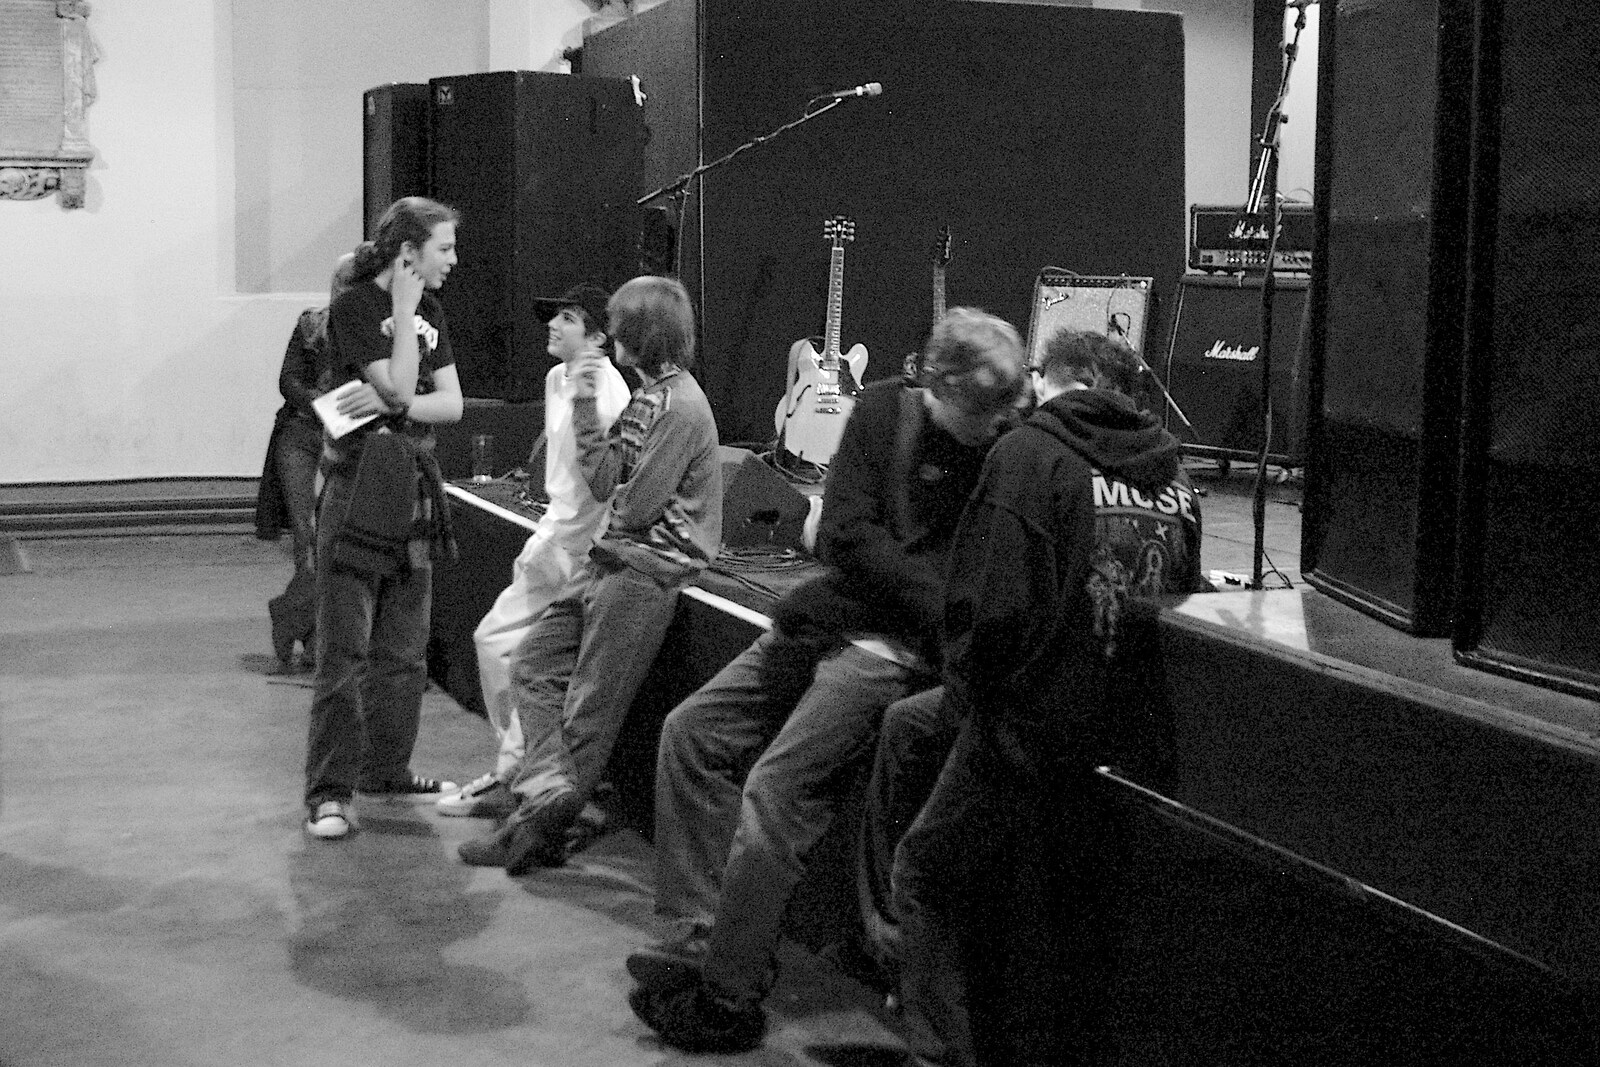 Three Nights of Music: Cord, Yaxley and the Tilting Sky, Norfolk and Suffolk - 21st January 2006: The young crowd starts building up